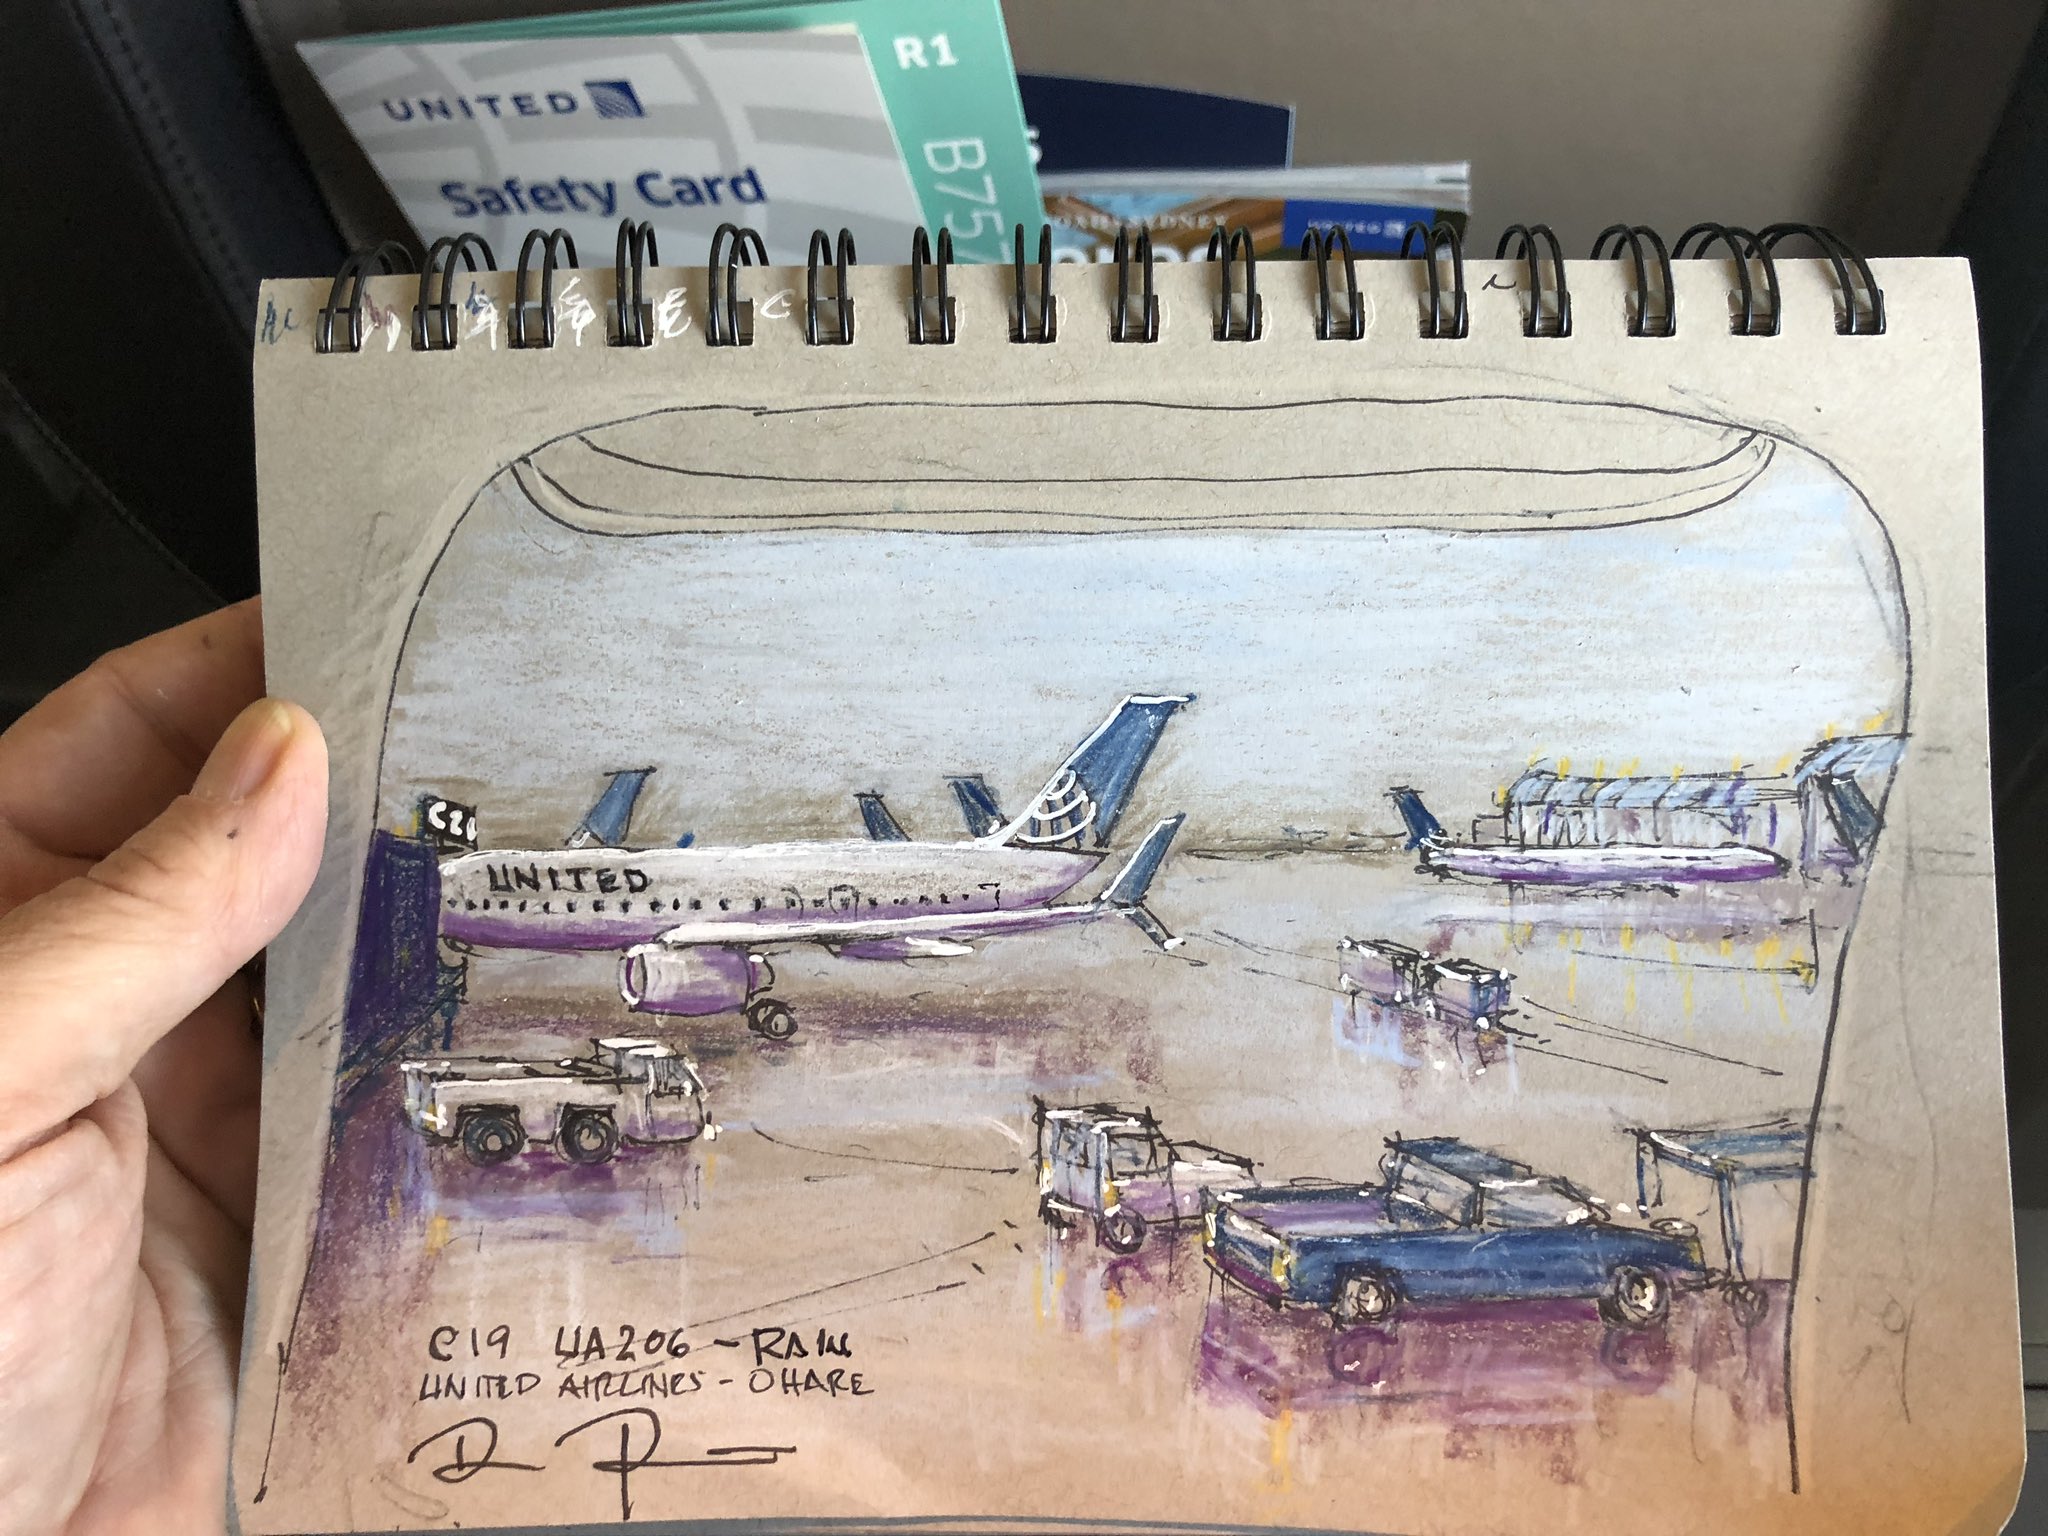 United Airlines on Twitter: "@robertsaia David, you are very talented. That is a beautiful sketch. Thank you for sharing with us. ^MT" / Twitter